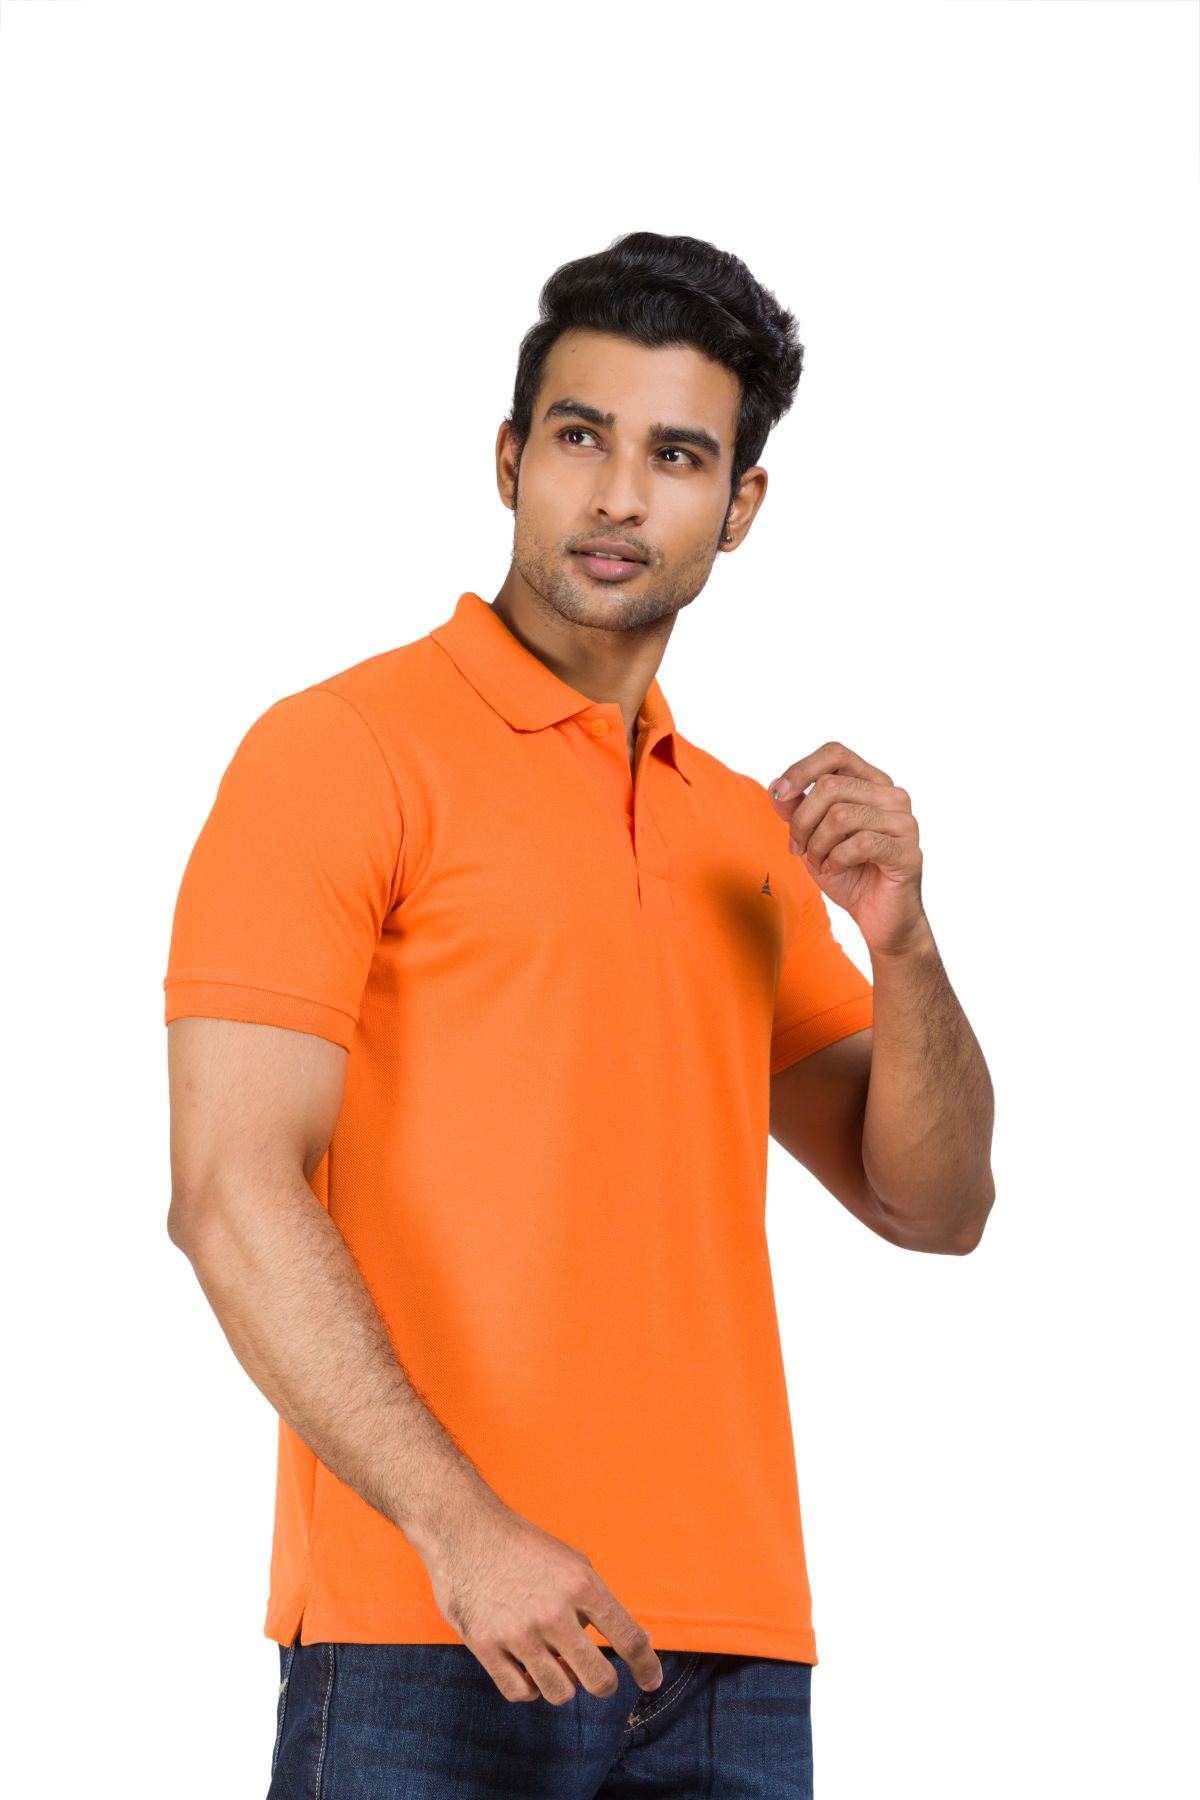 Regular Fit Half Sleeve Orange Polo is made of comfortable, cotton blend pique fabric. Suitable for office or for any casual day